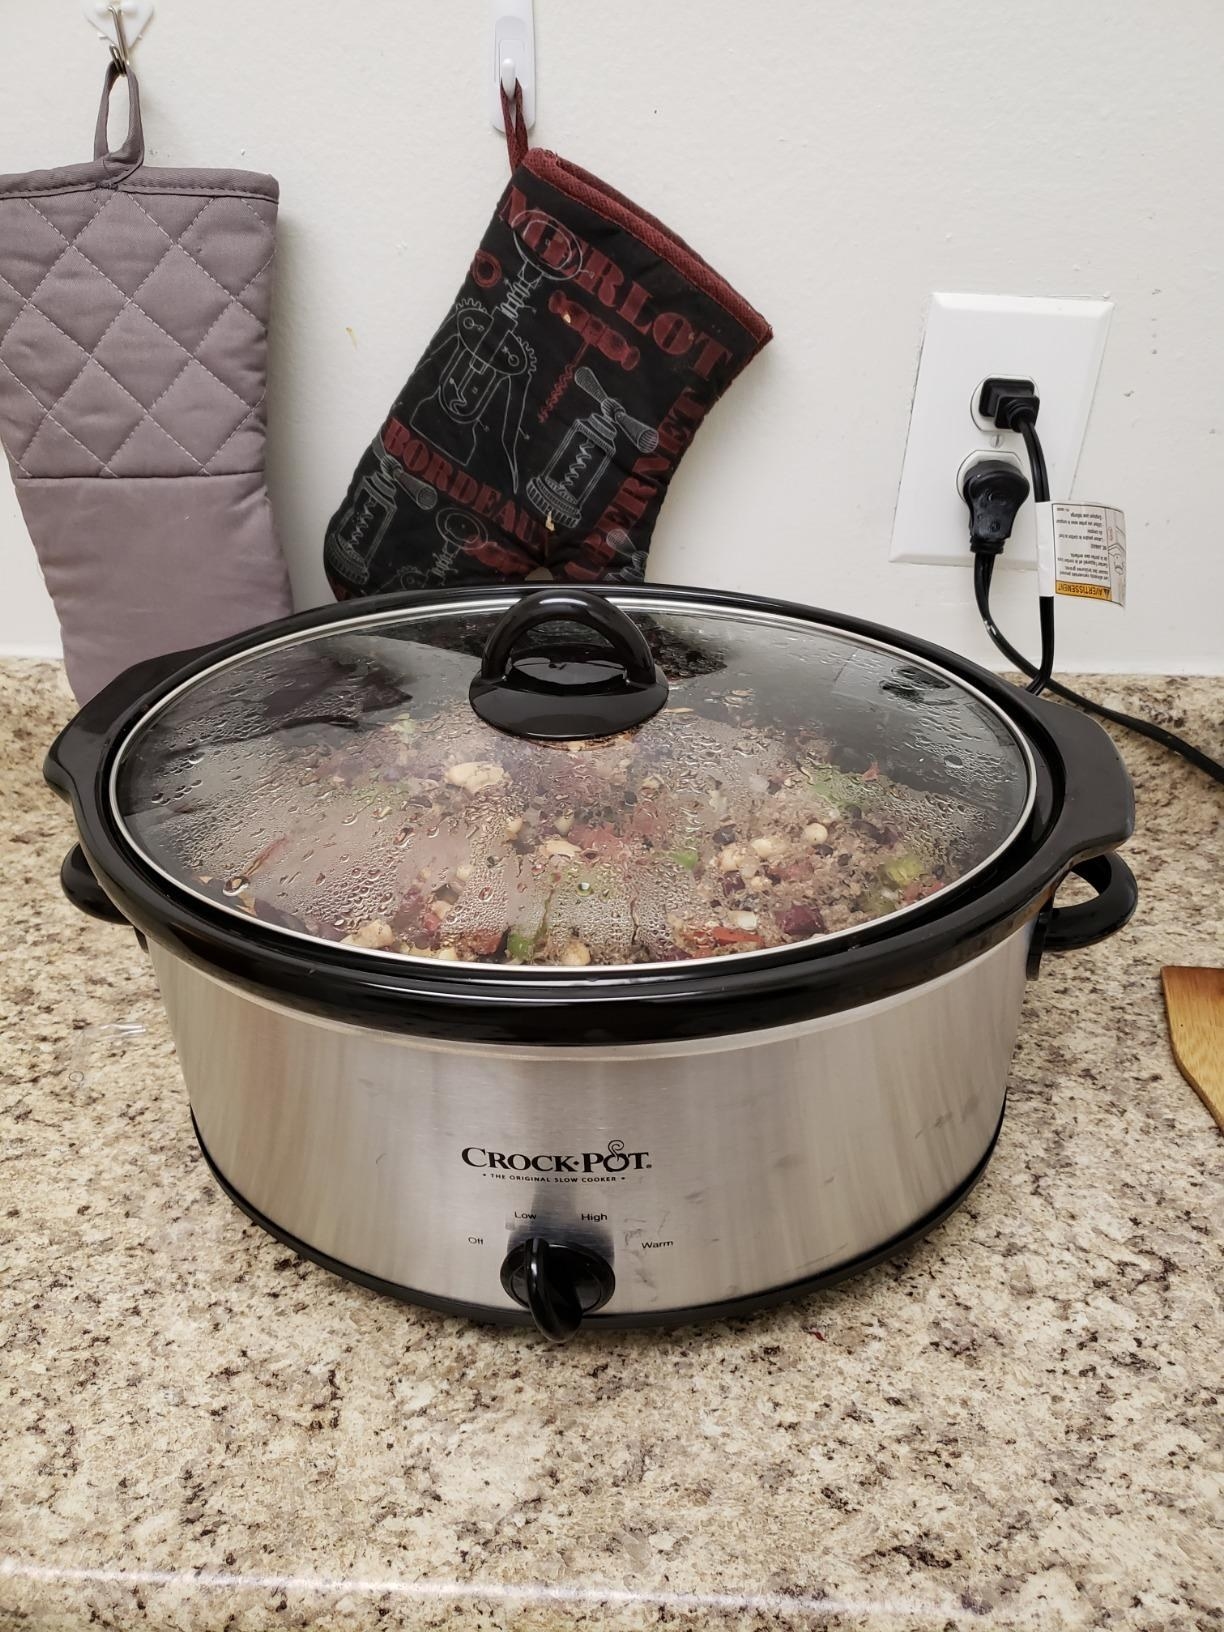 The Crock Pot cooking food on a kitchen counter